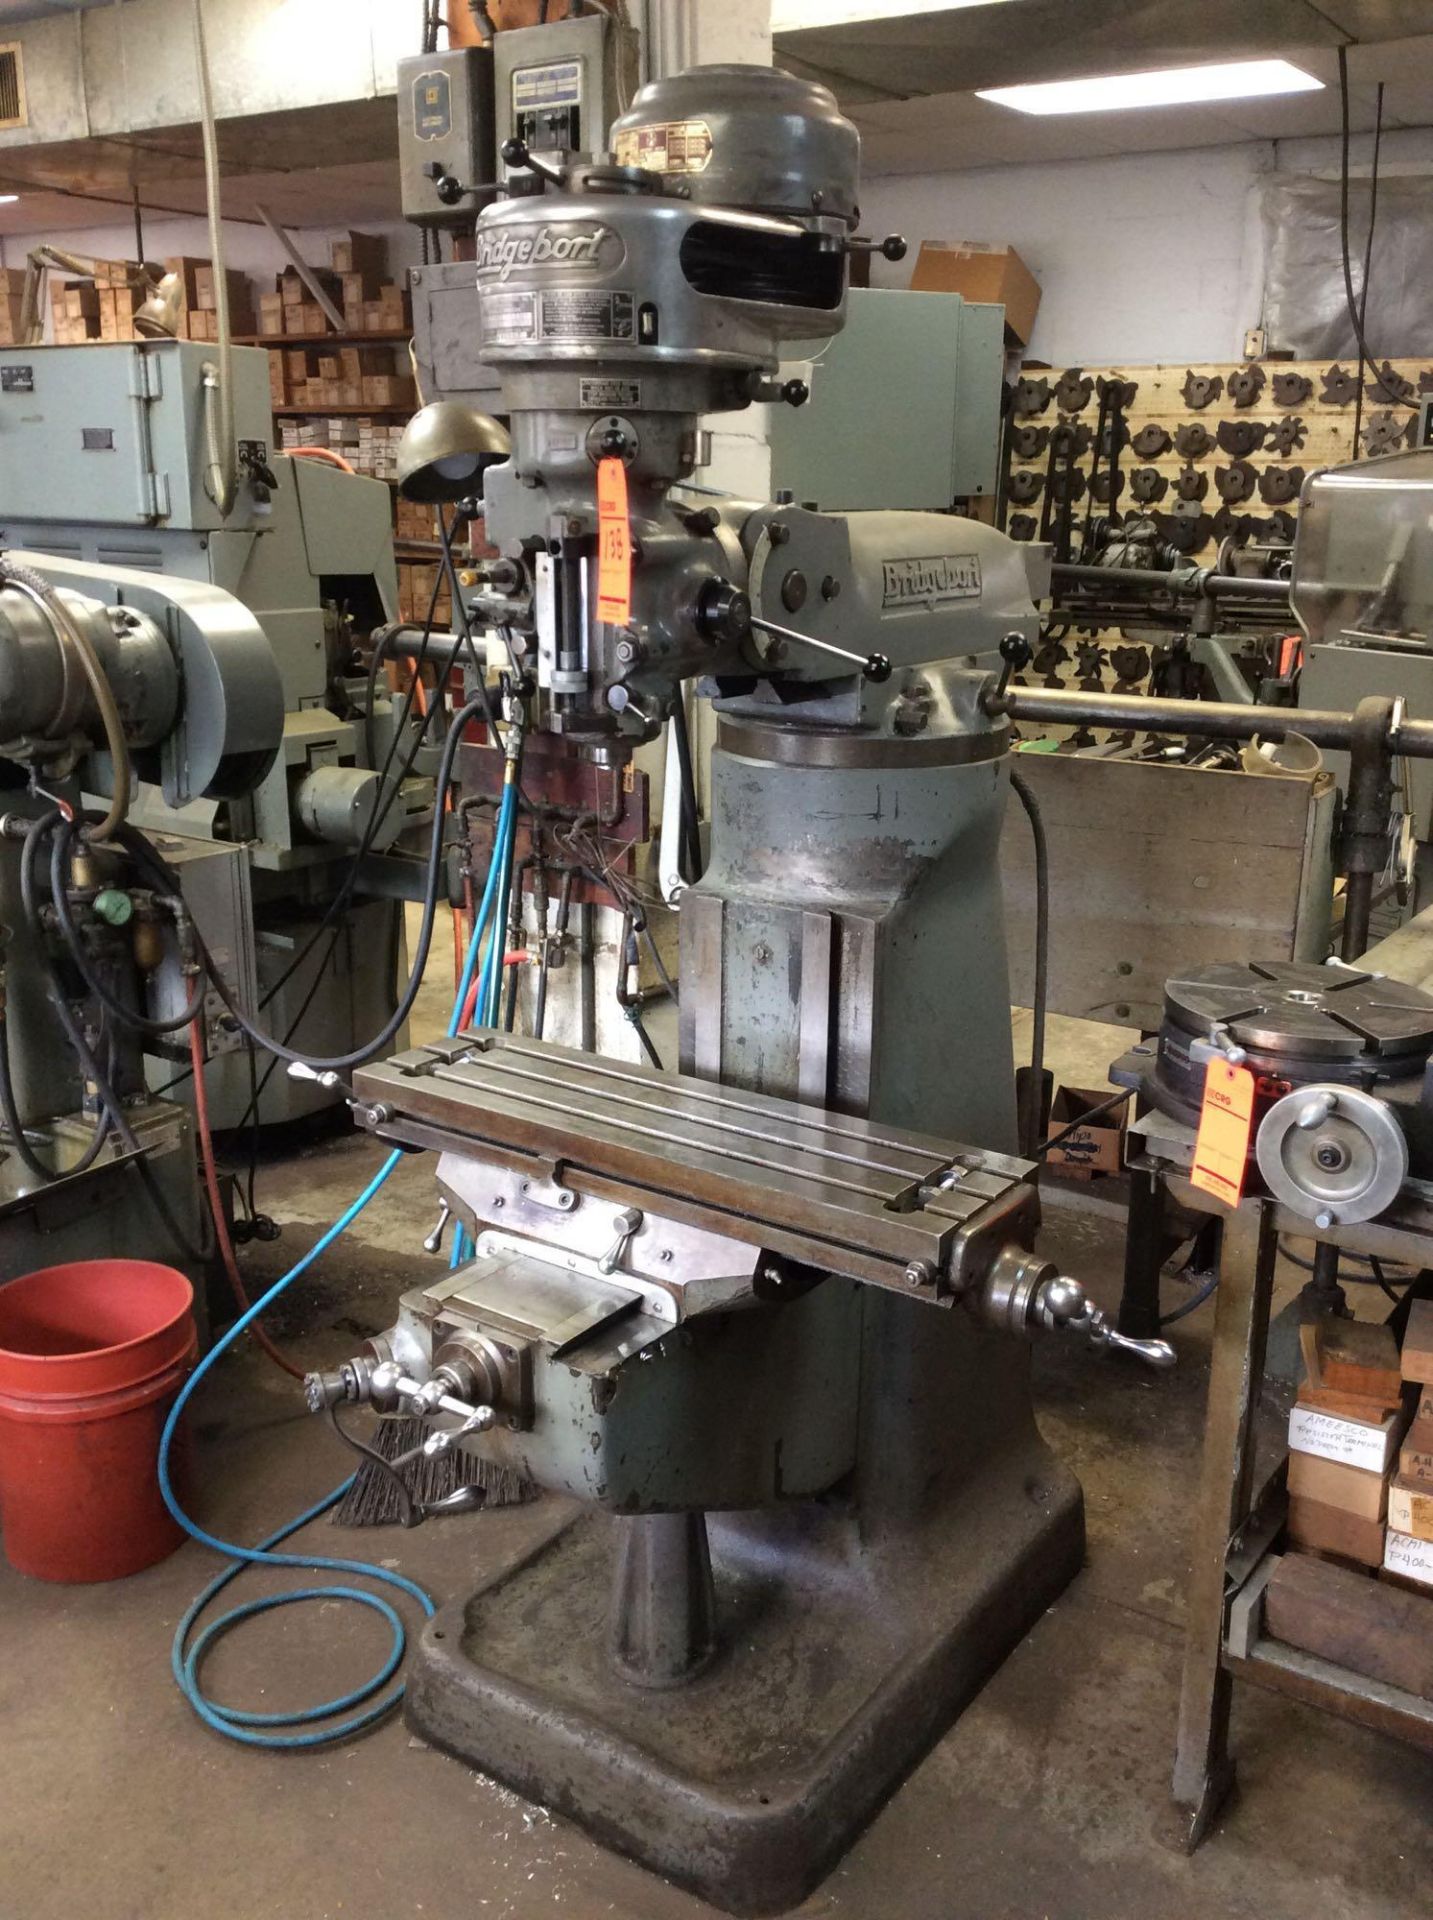 Bridgeport vertical milling machine, sn 39450, 1 hp, 3 phase, 9" x 32" T-slot table - Image 2 of 4